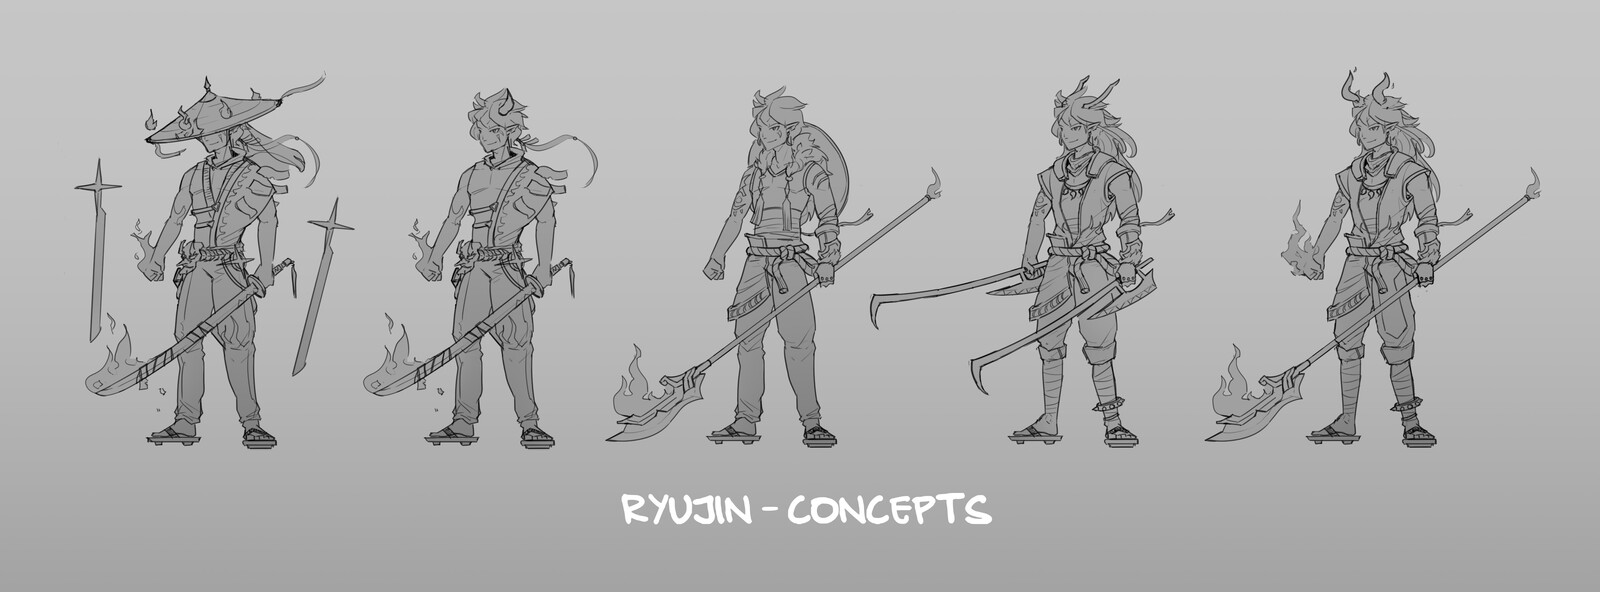 Character concepts